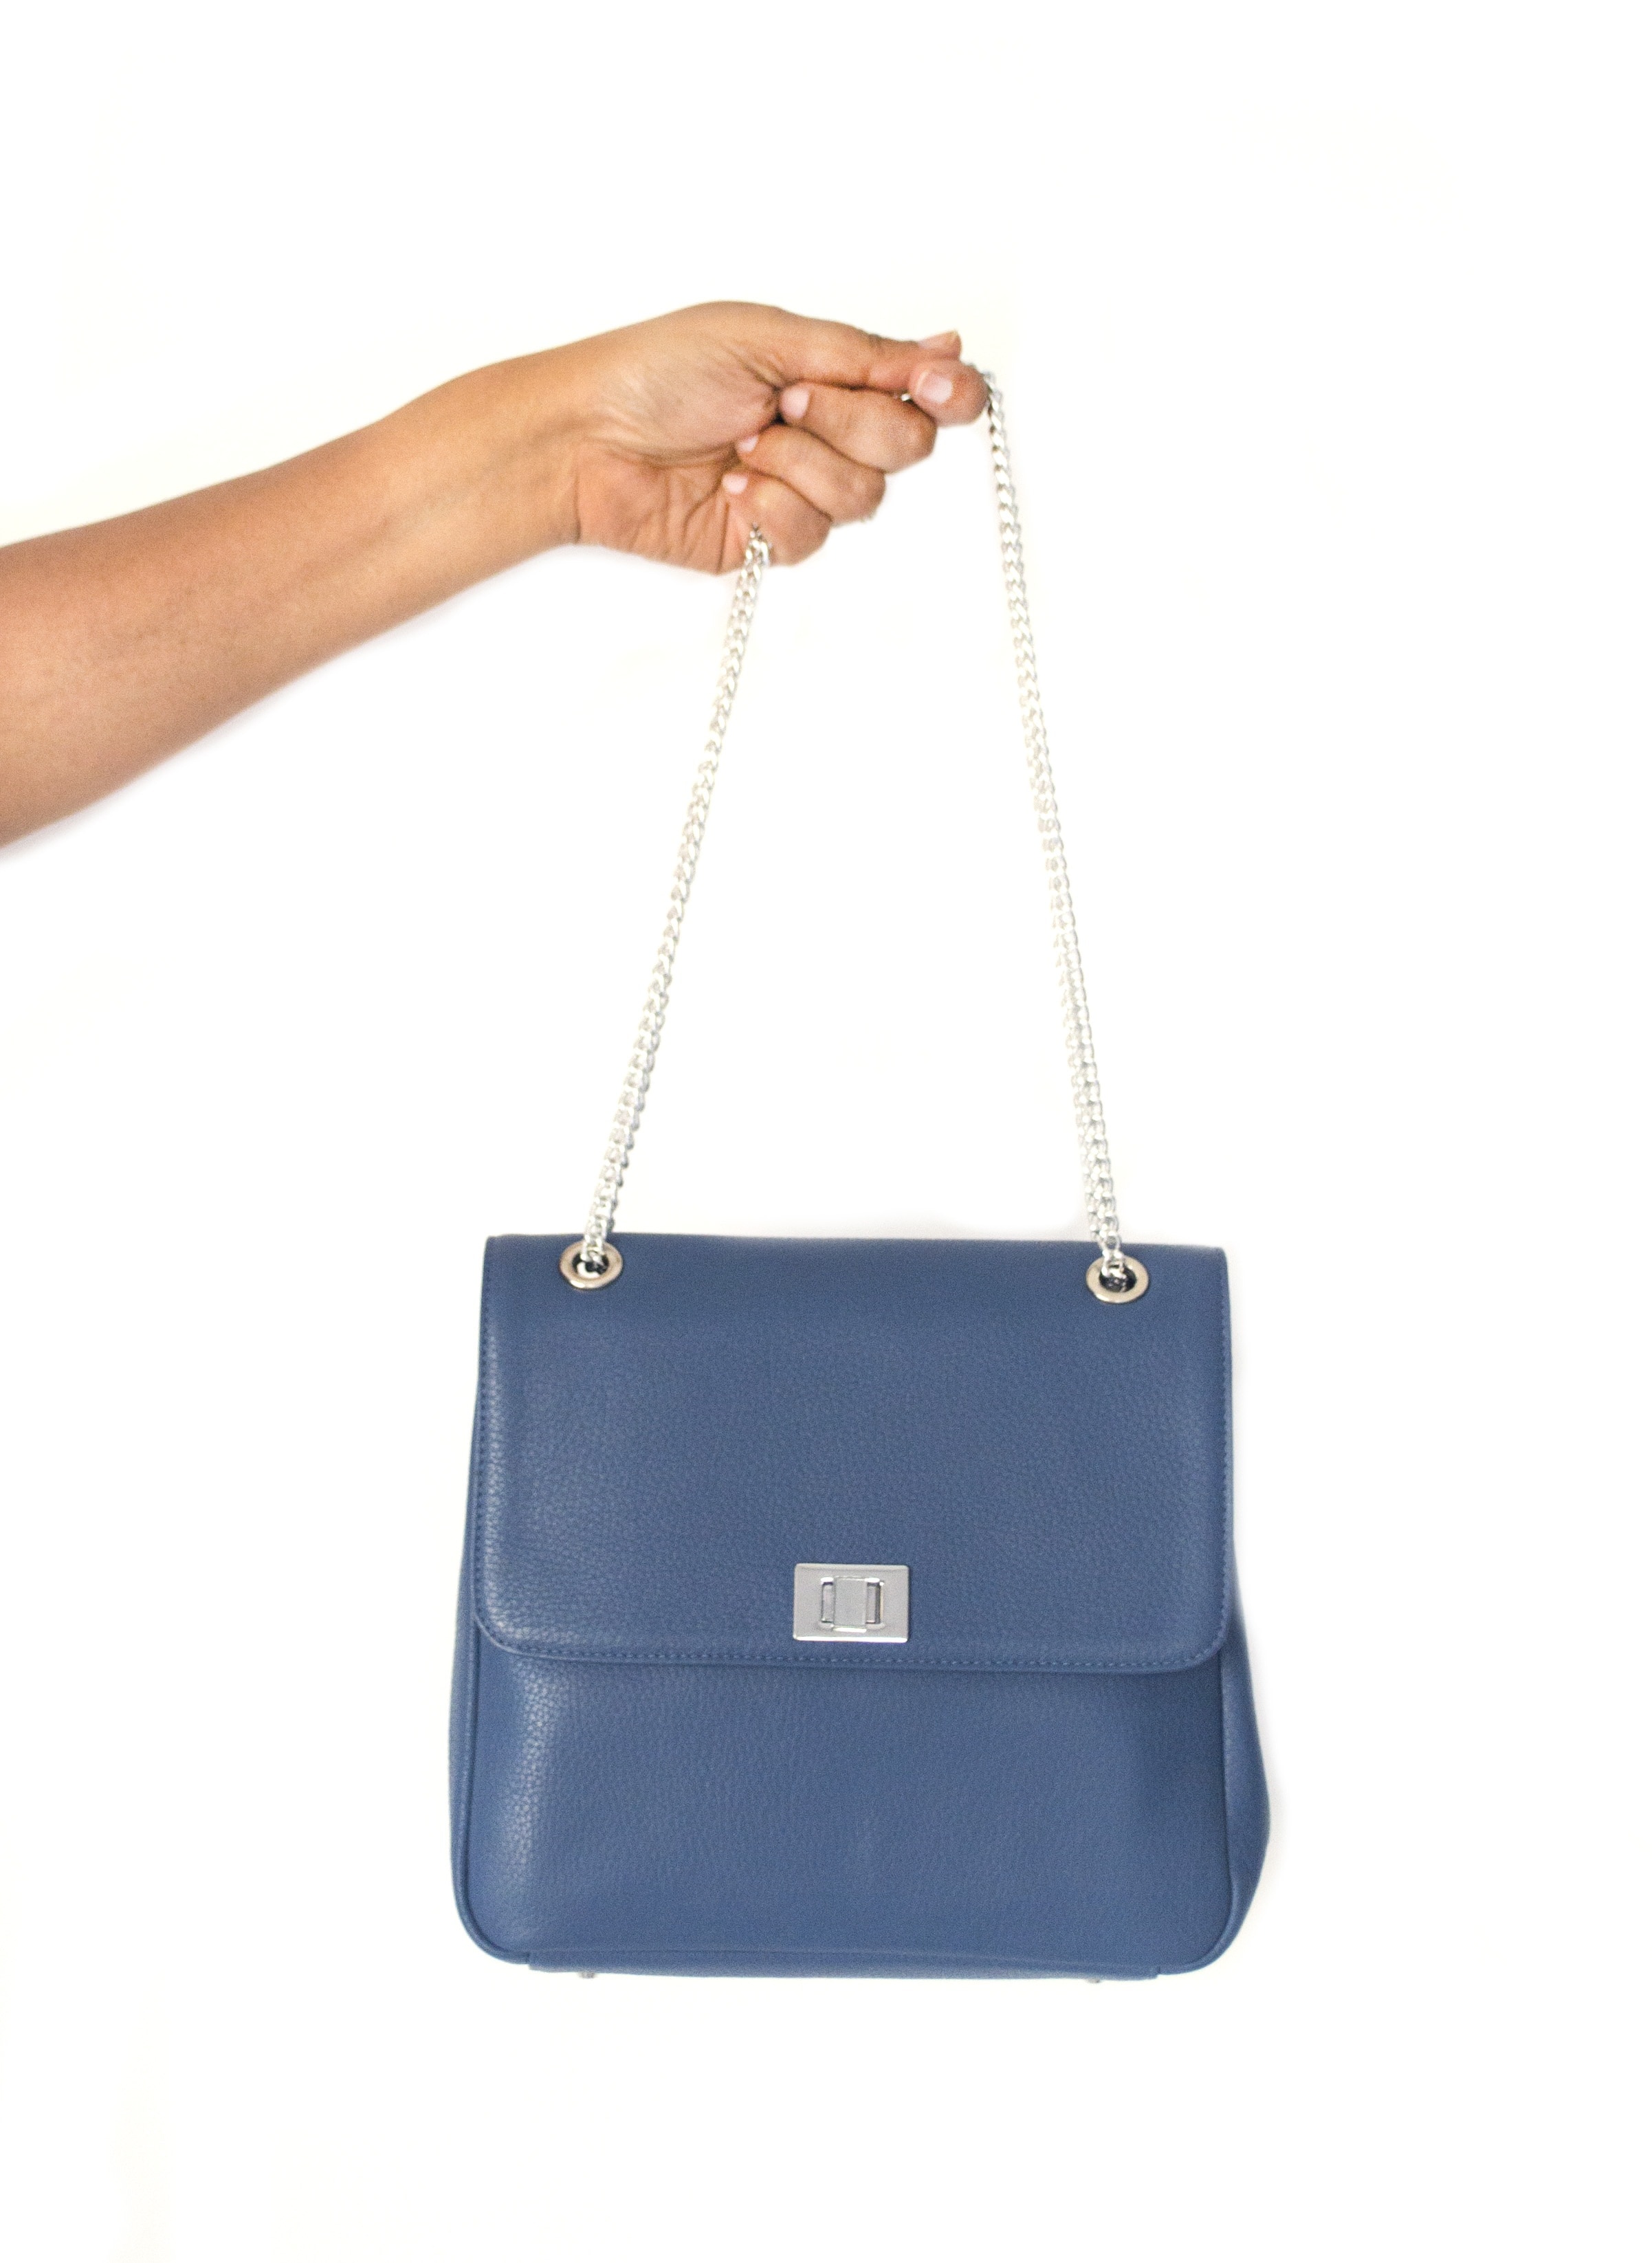 blue leather hand bag